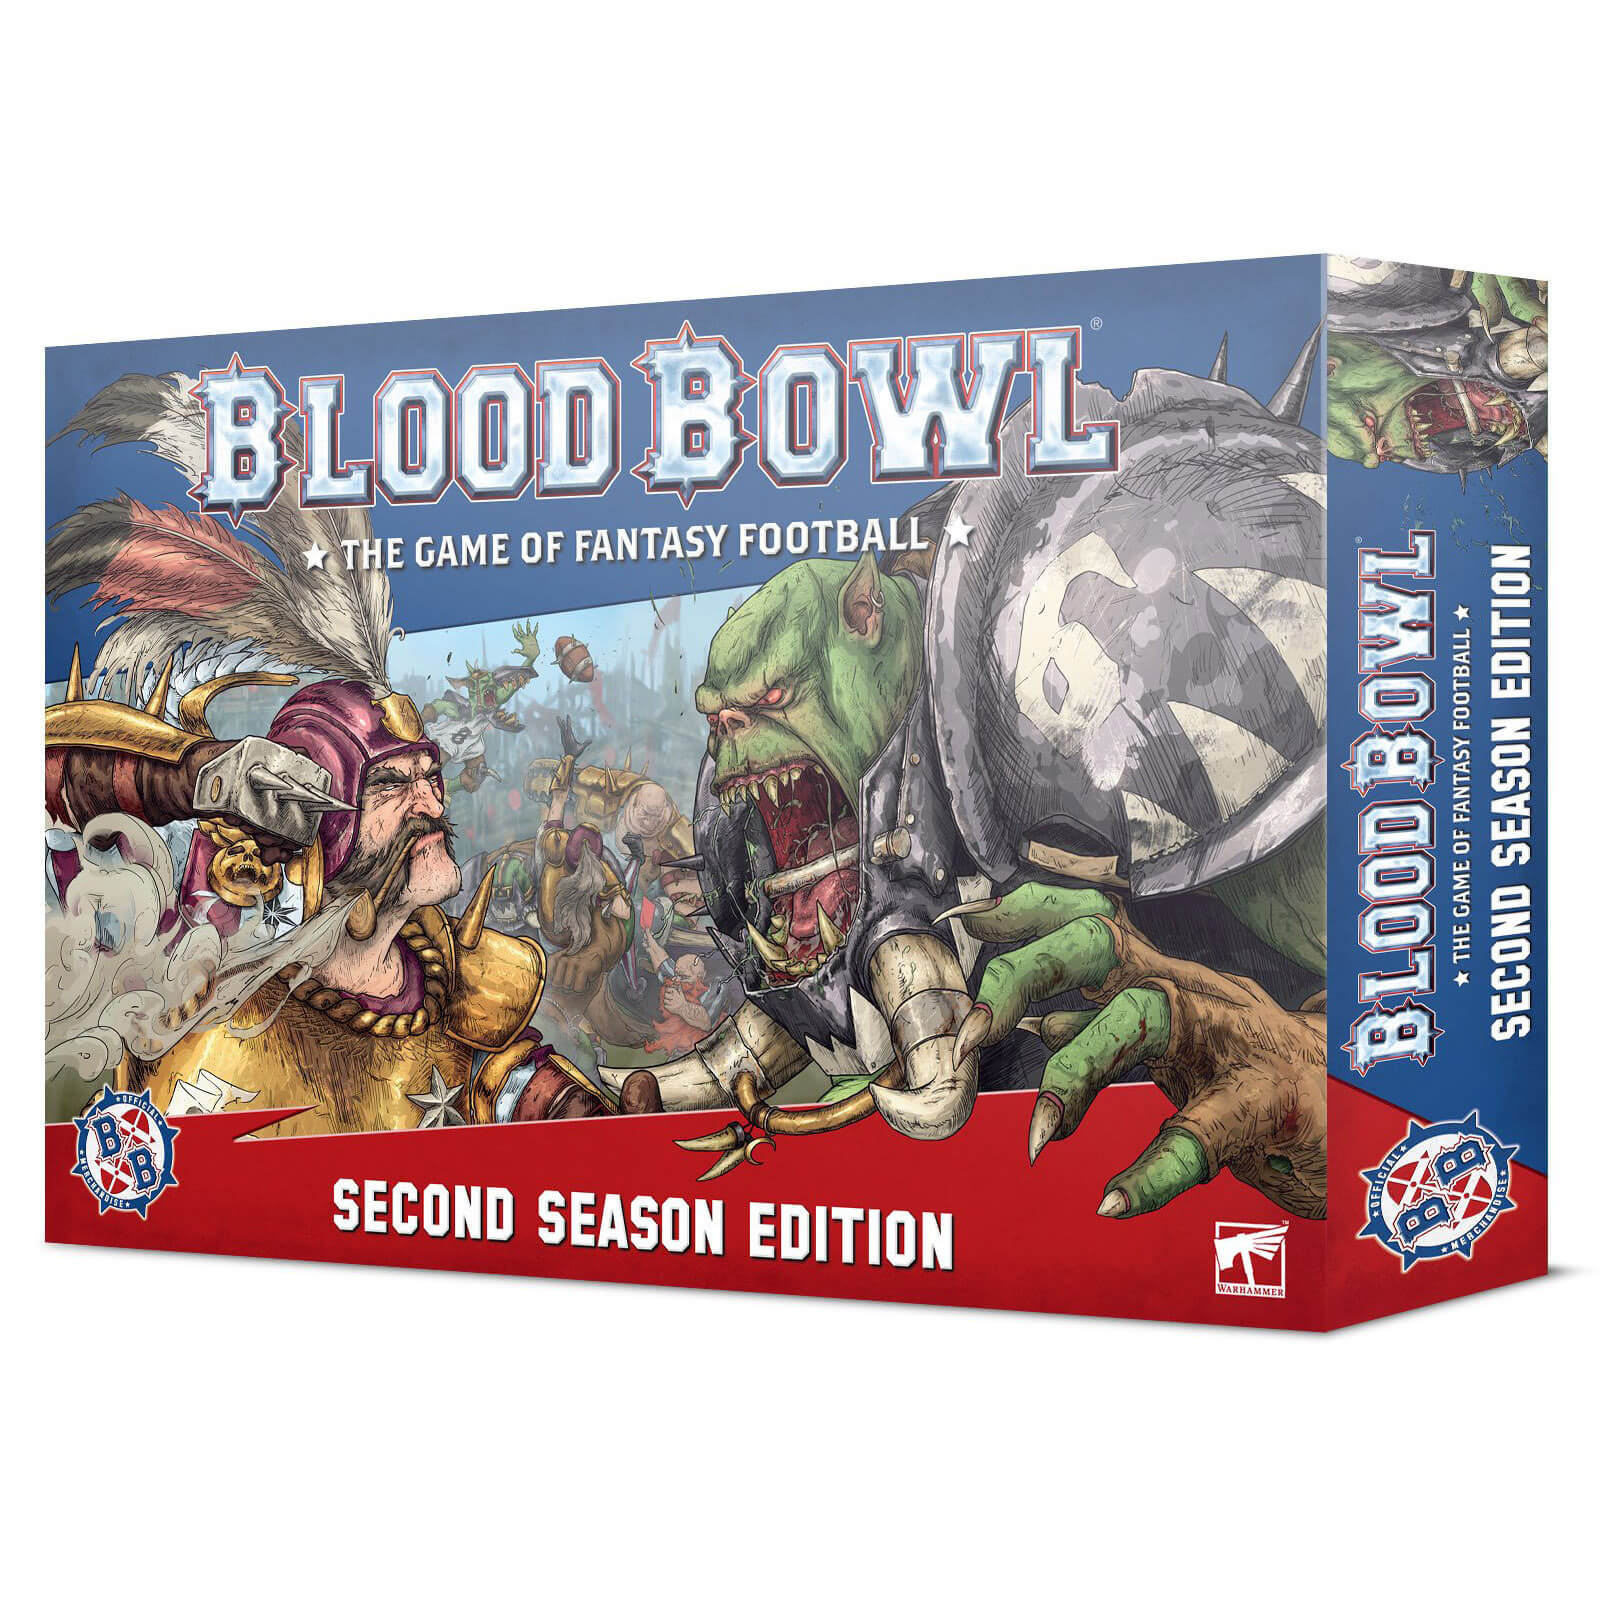 Games Workshop Second Season game box says The Game of Fantasy Football.